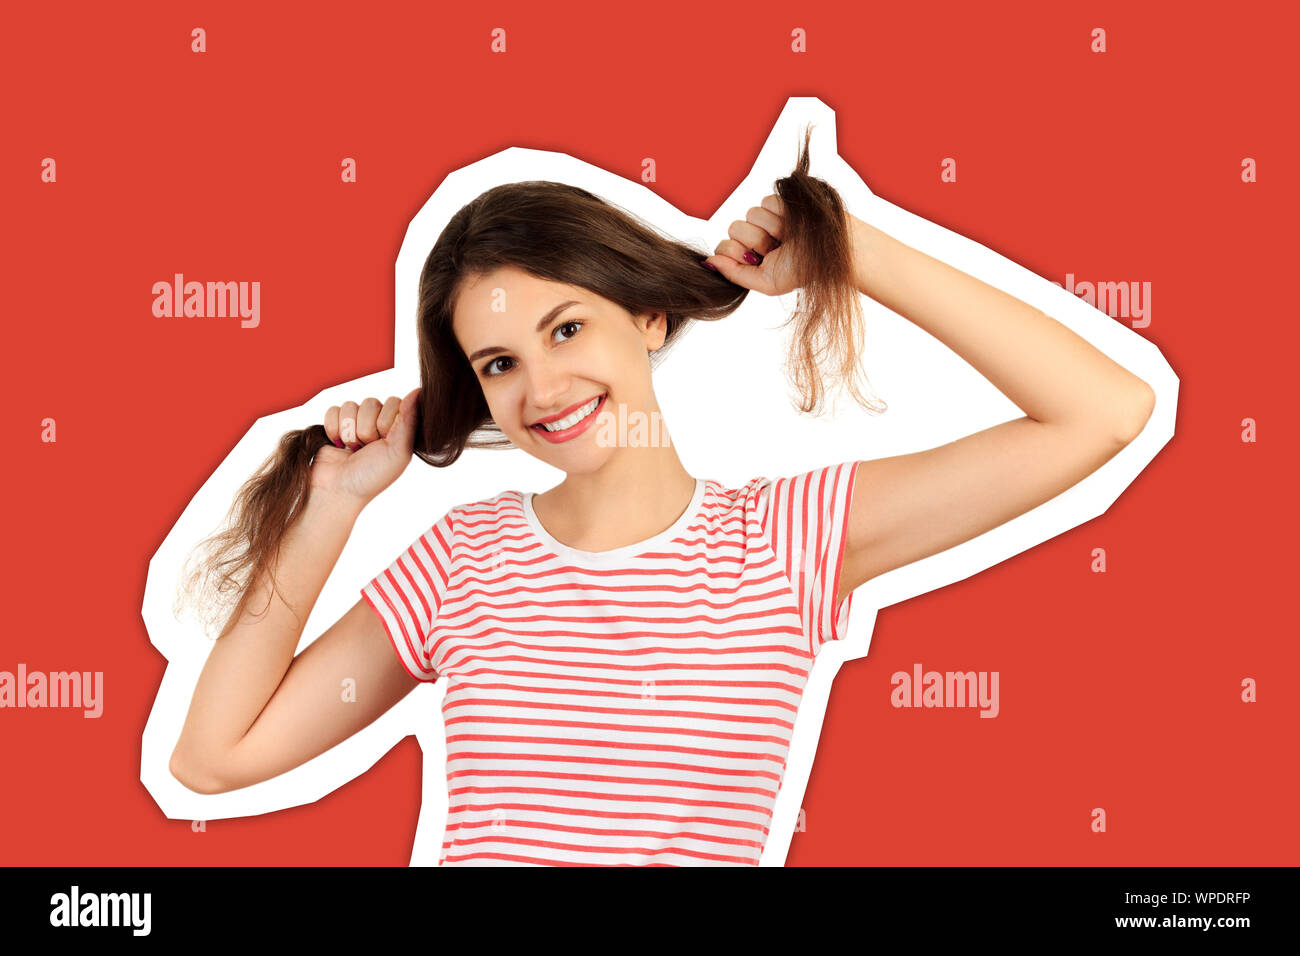 Girl confused with her hair. emotional girl Magazine collage style with trendy color background. Stock Photo